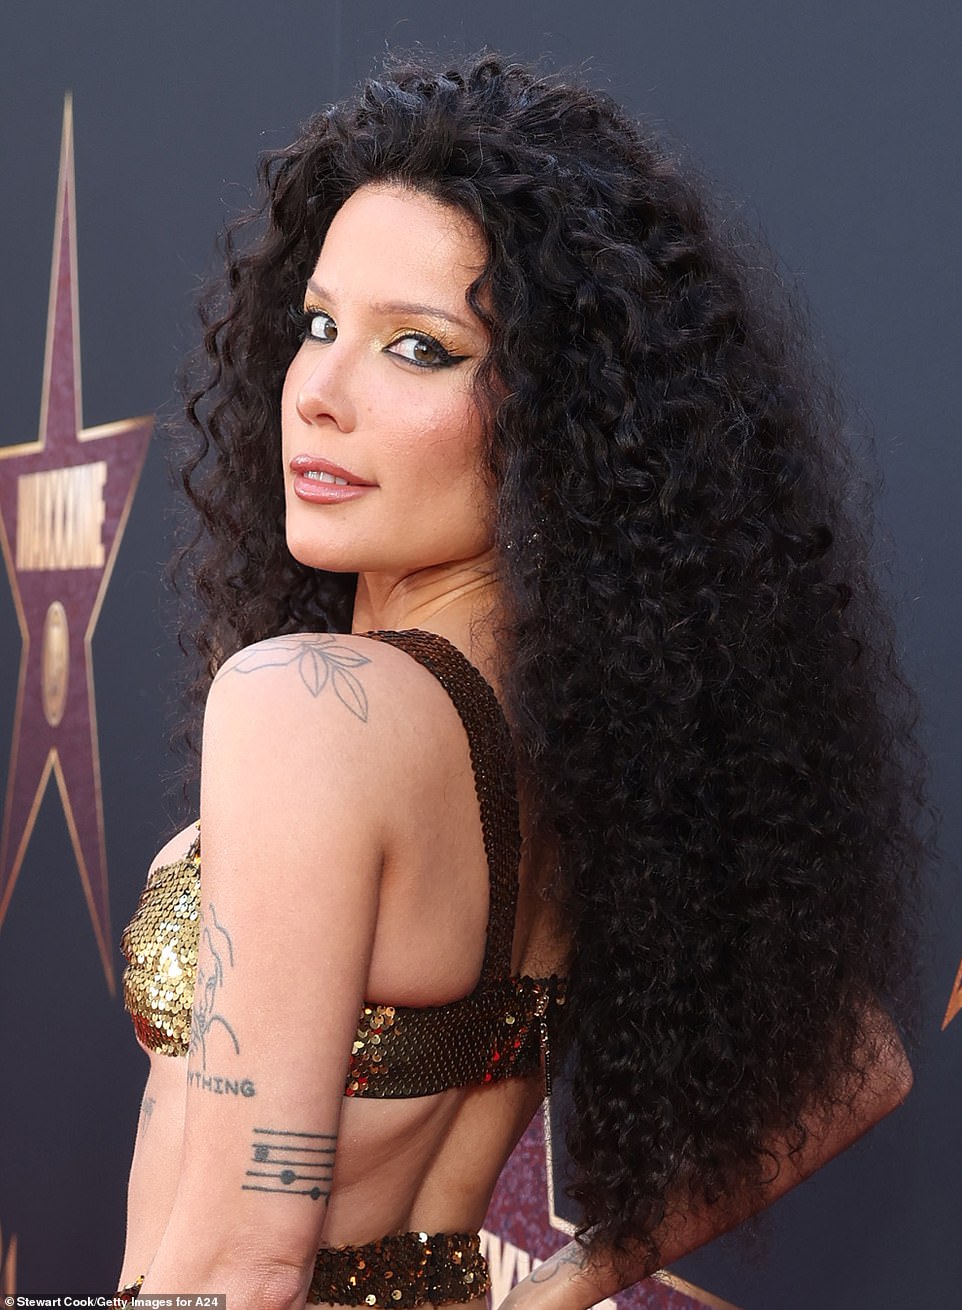 The three-time Grammy nominee wore yellow eyeshadow, likely from her brand About-Face Beauty, and she brought the disco realness with a voluminous, curly black wig over her pixie cut.